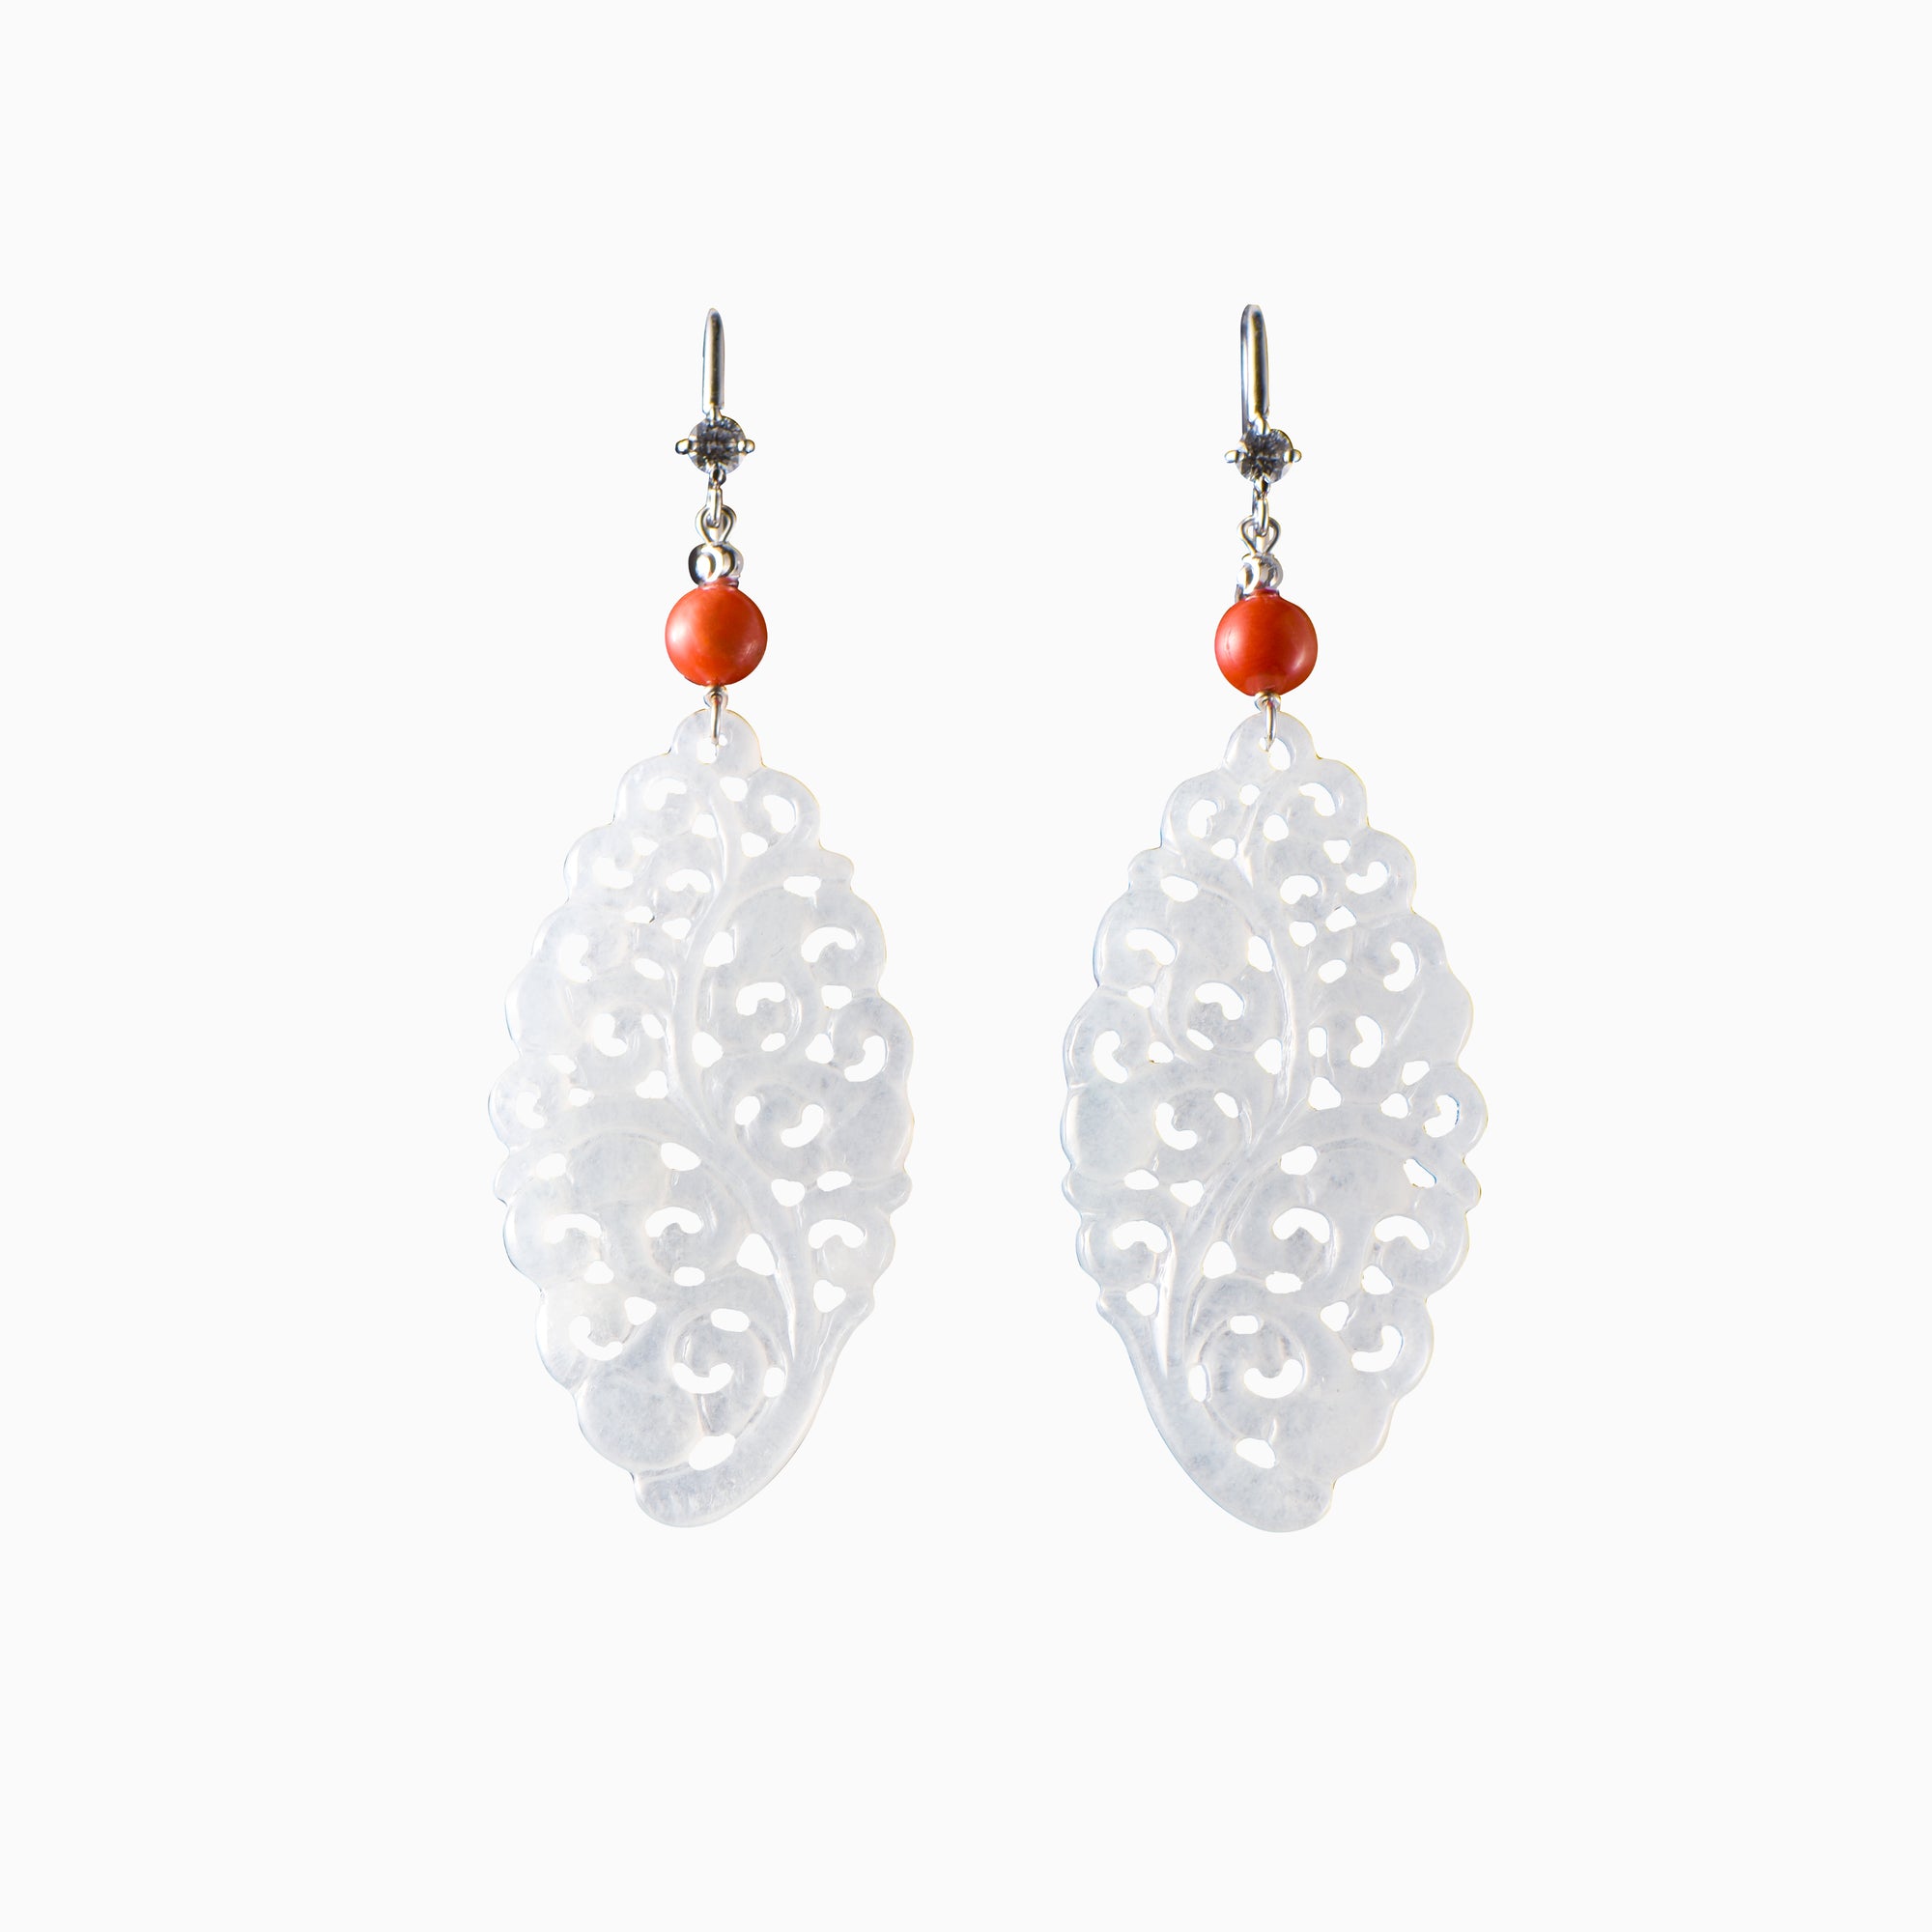 White jade earrings in a lotus pattern, decorated with coral and diamonds